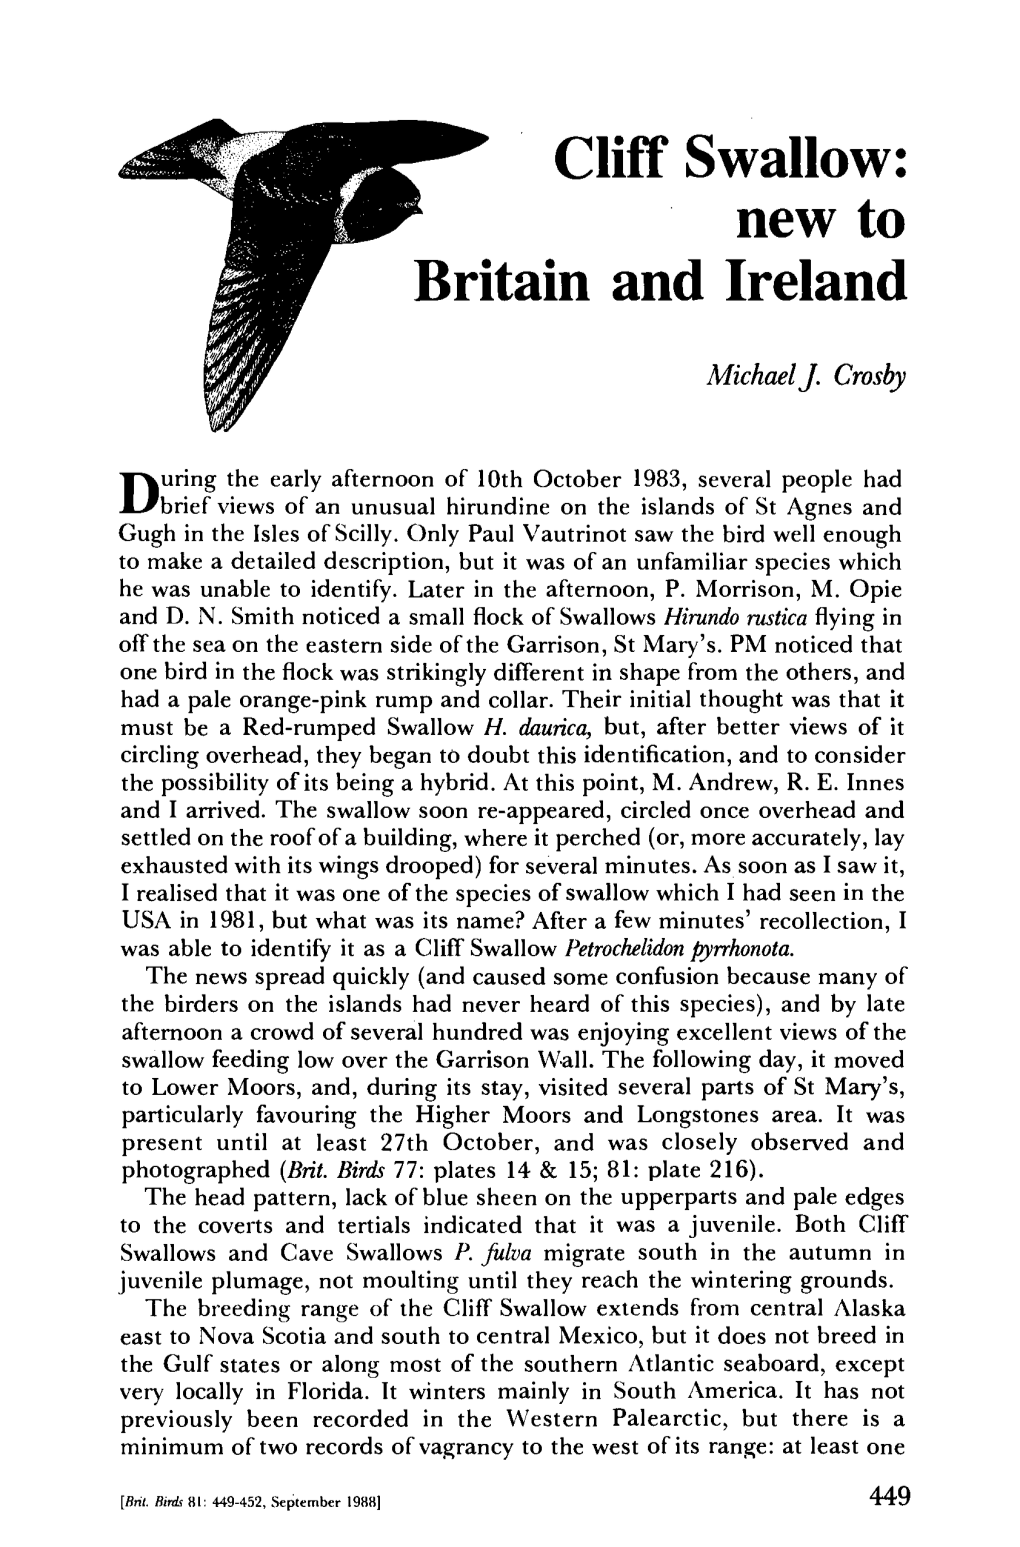 Cliff Swallow: New to Britain and Ireland